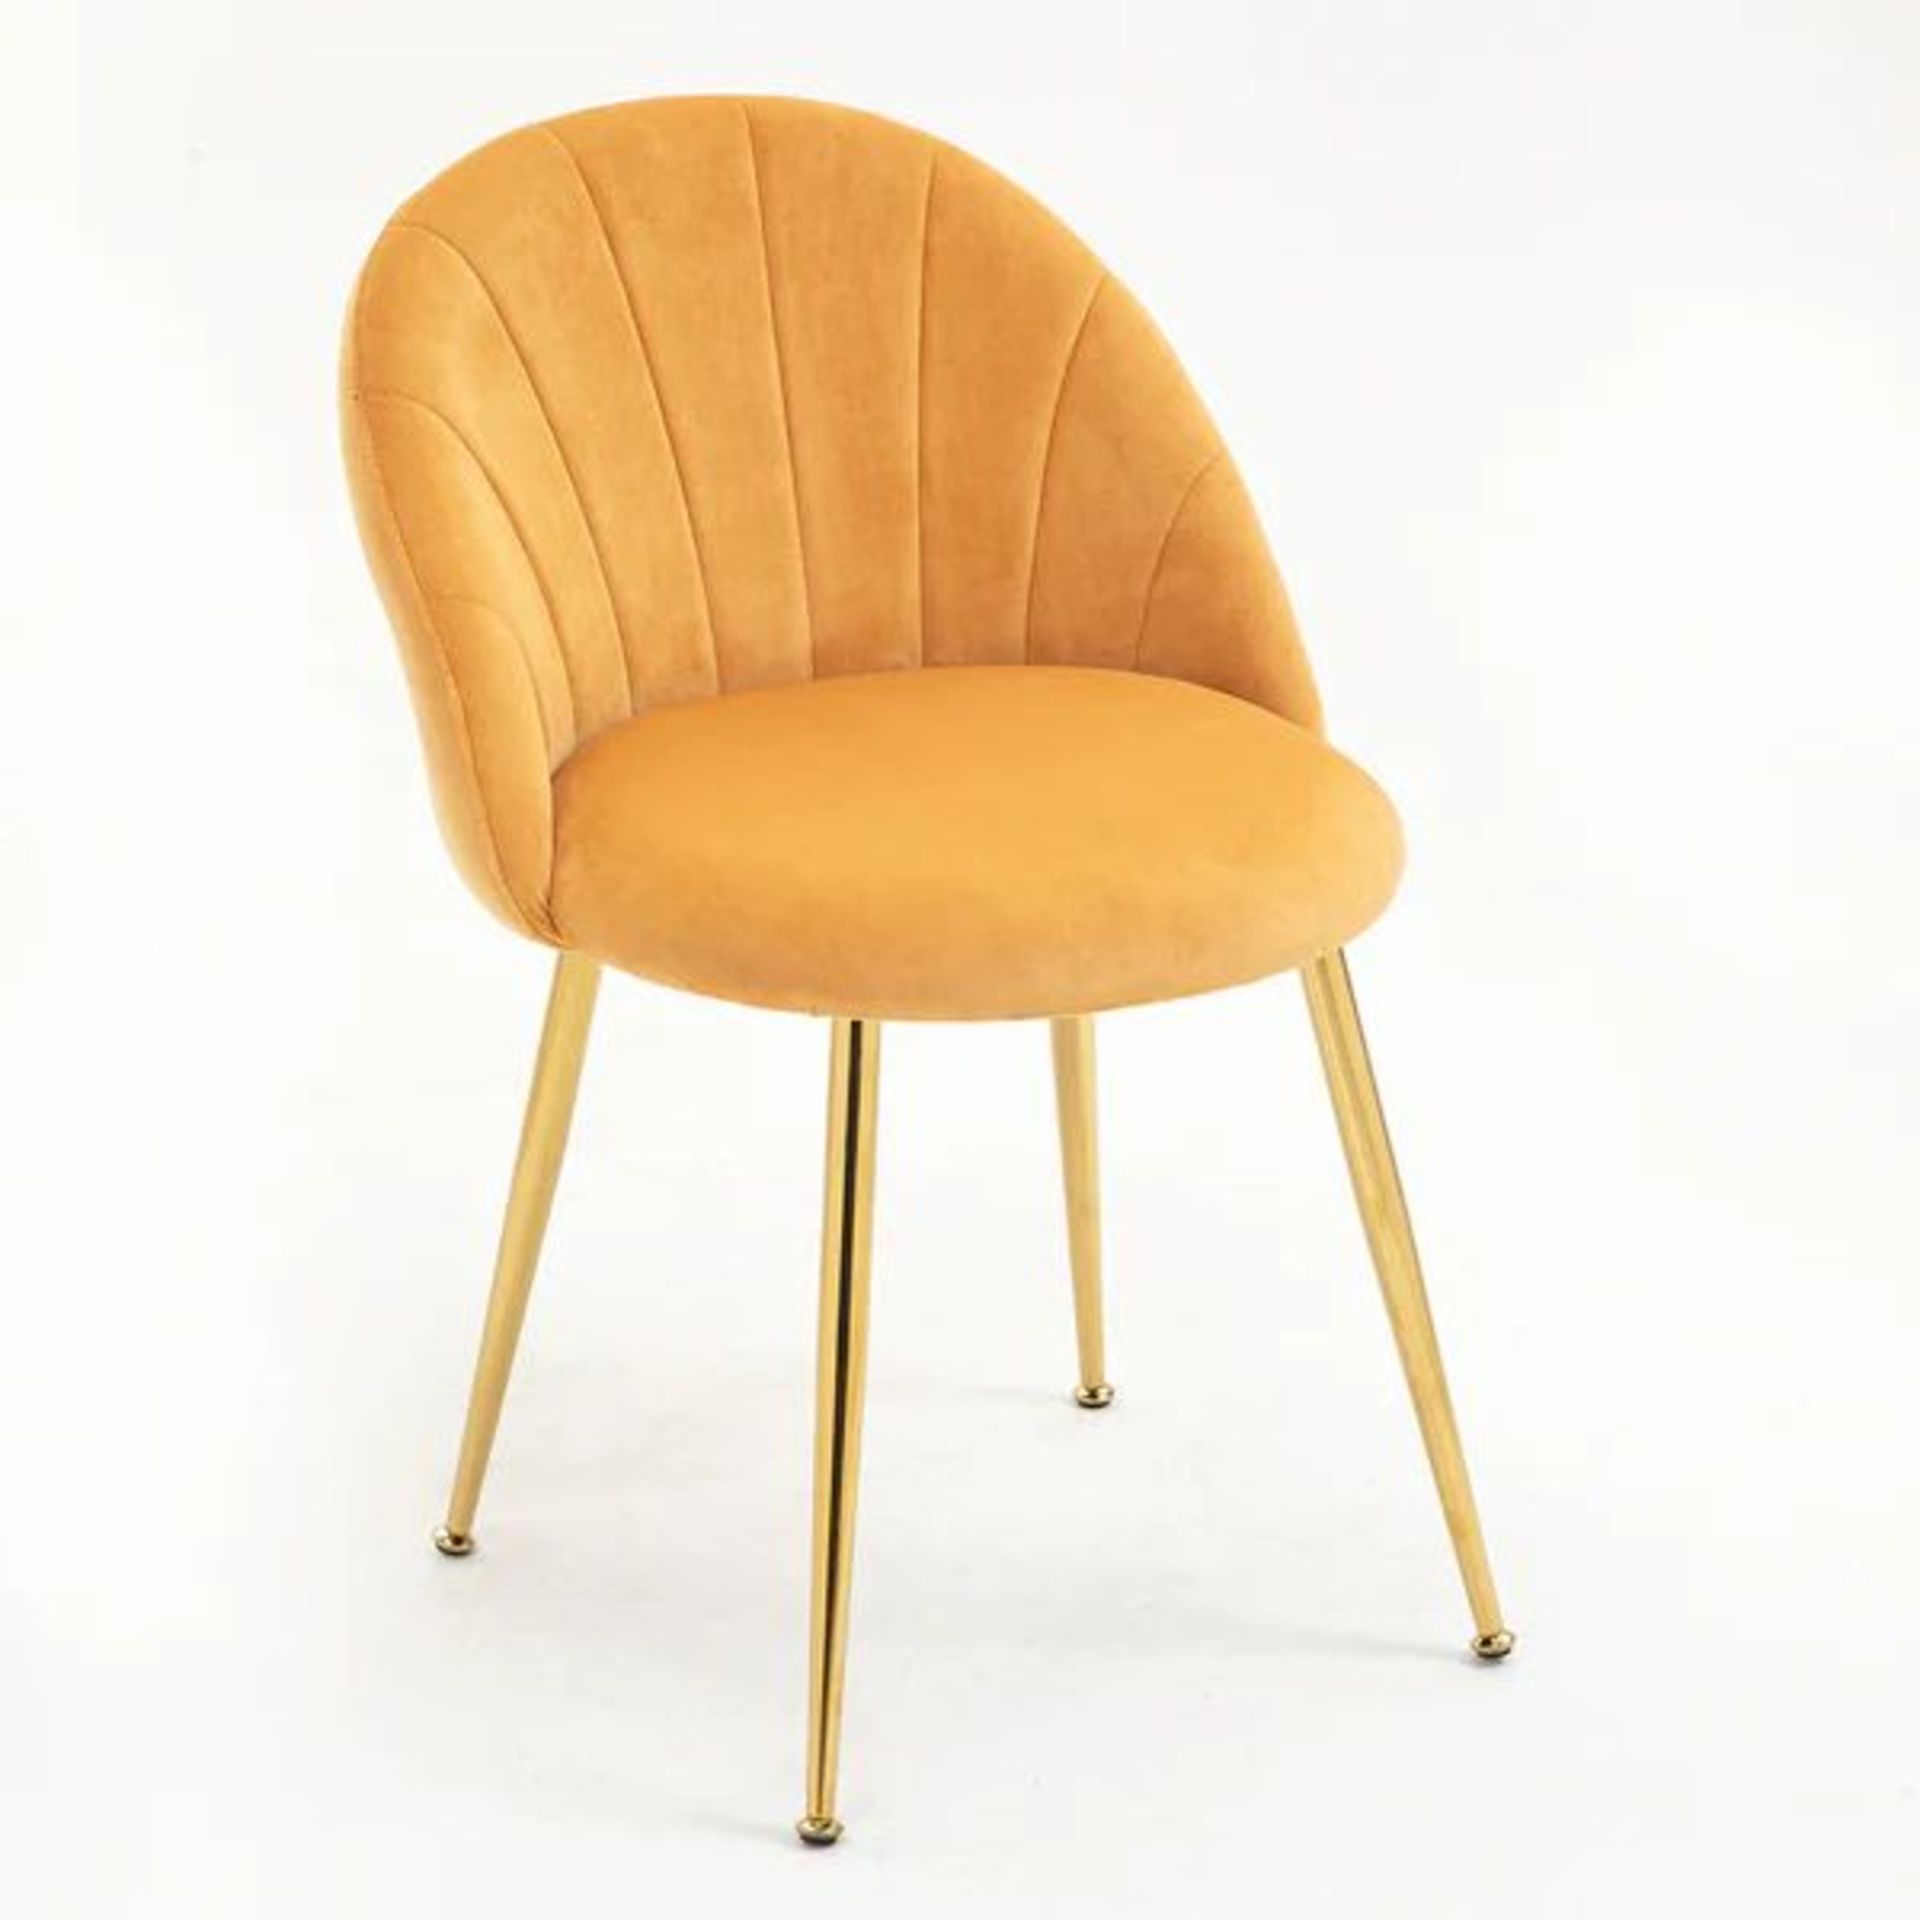 Milverton Pair of 2 Velvet Dining Chairs with Golden Chrome Legs (Mustard). - ER31. RRP £219.99. Our - Image 2 of 2